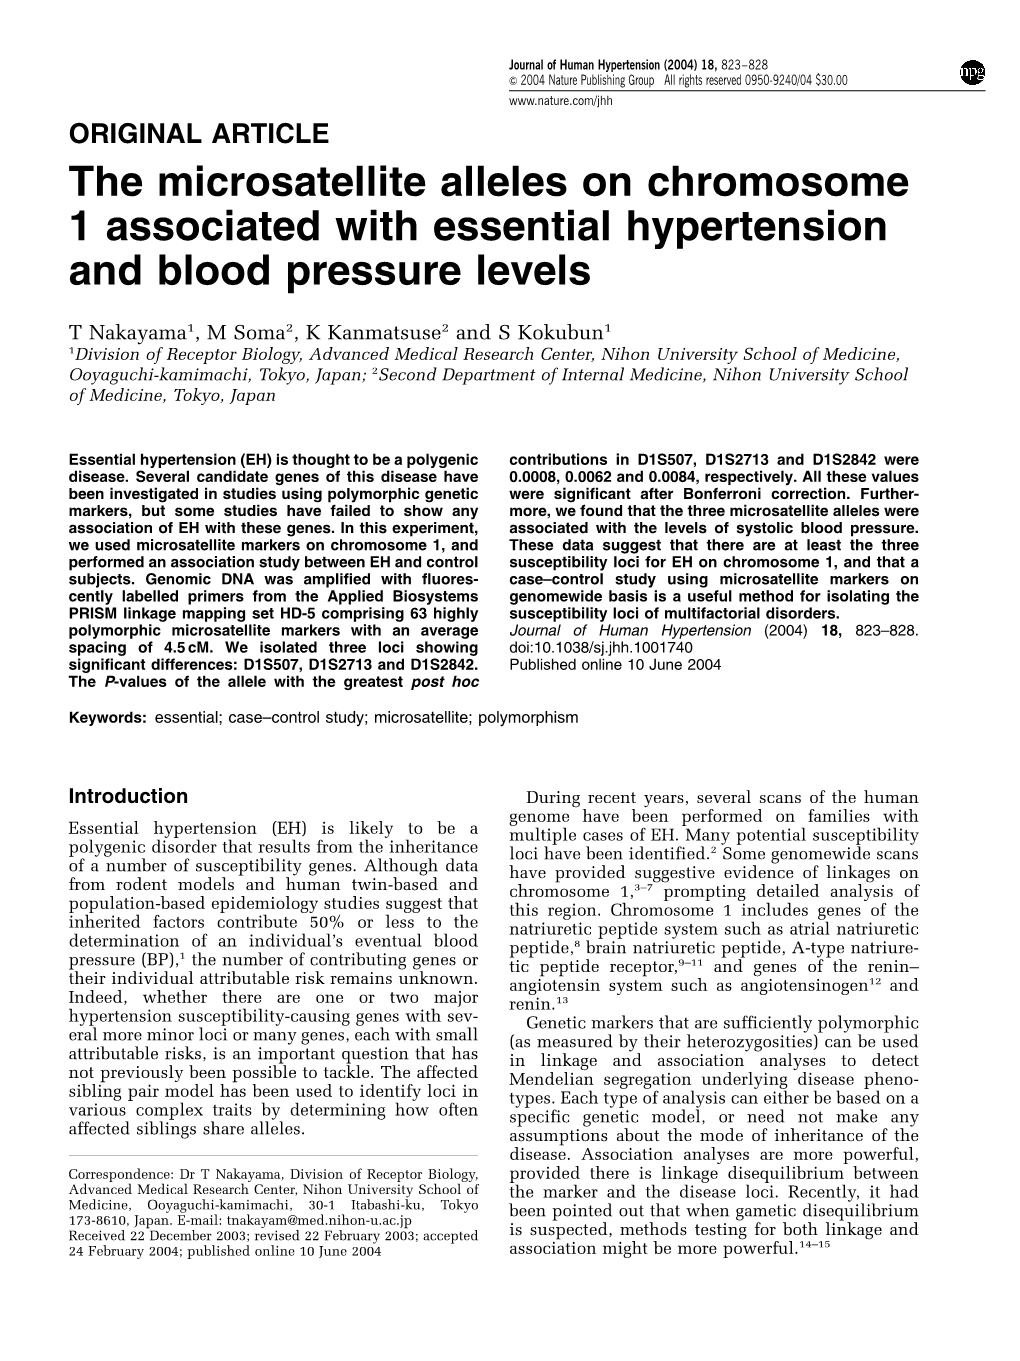 The Microsatellite Alleles on Chromosome 1 Associated with Essential Hypertension and Blood Pressure Levels